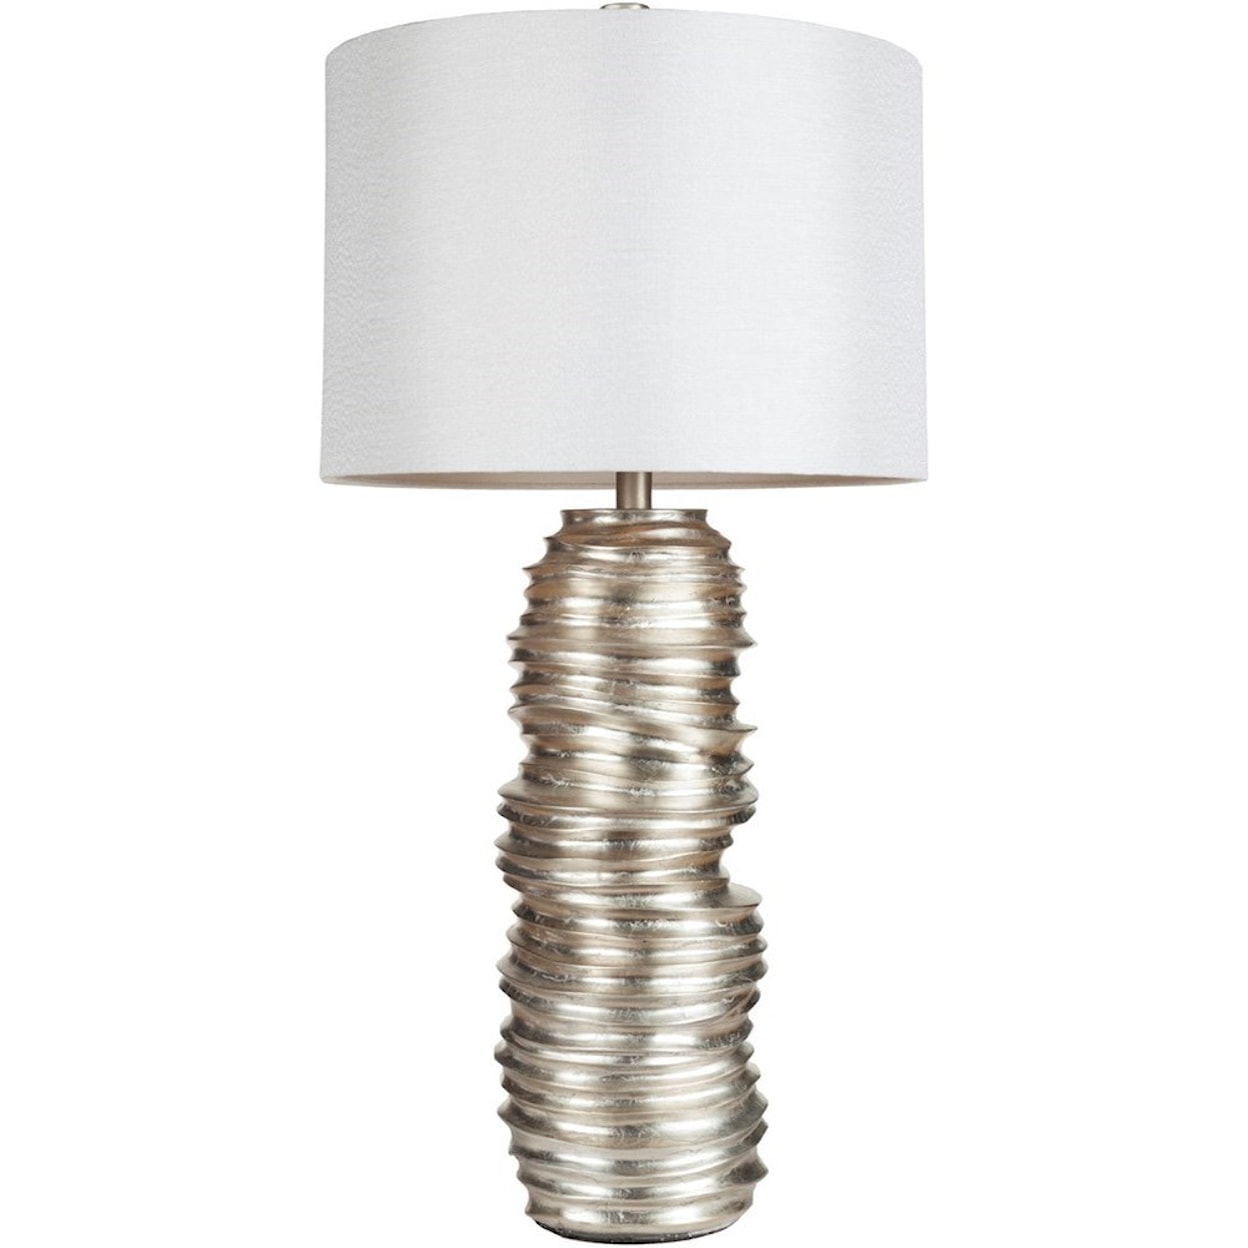 Surya Lamps Aged Silvertone Leaf Contemporary Table Lamp